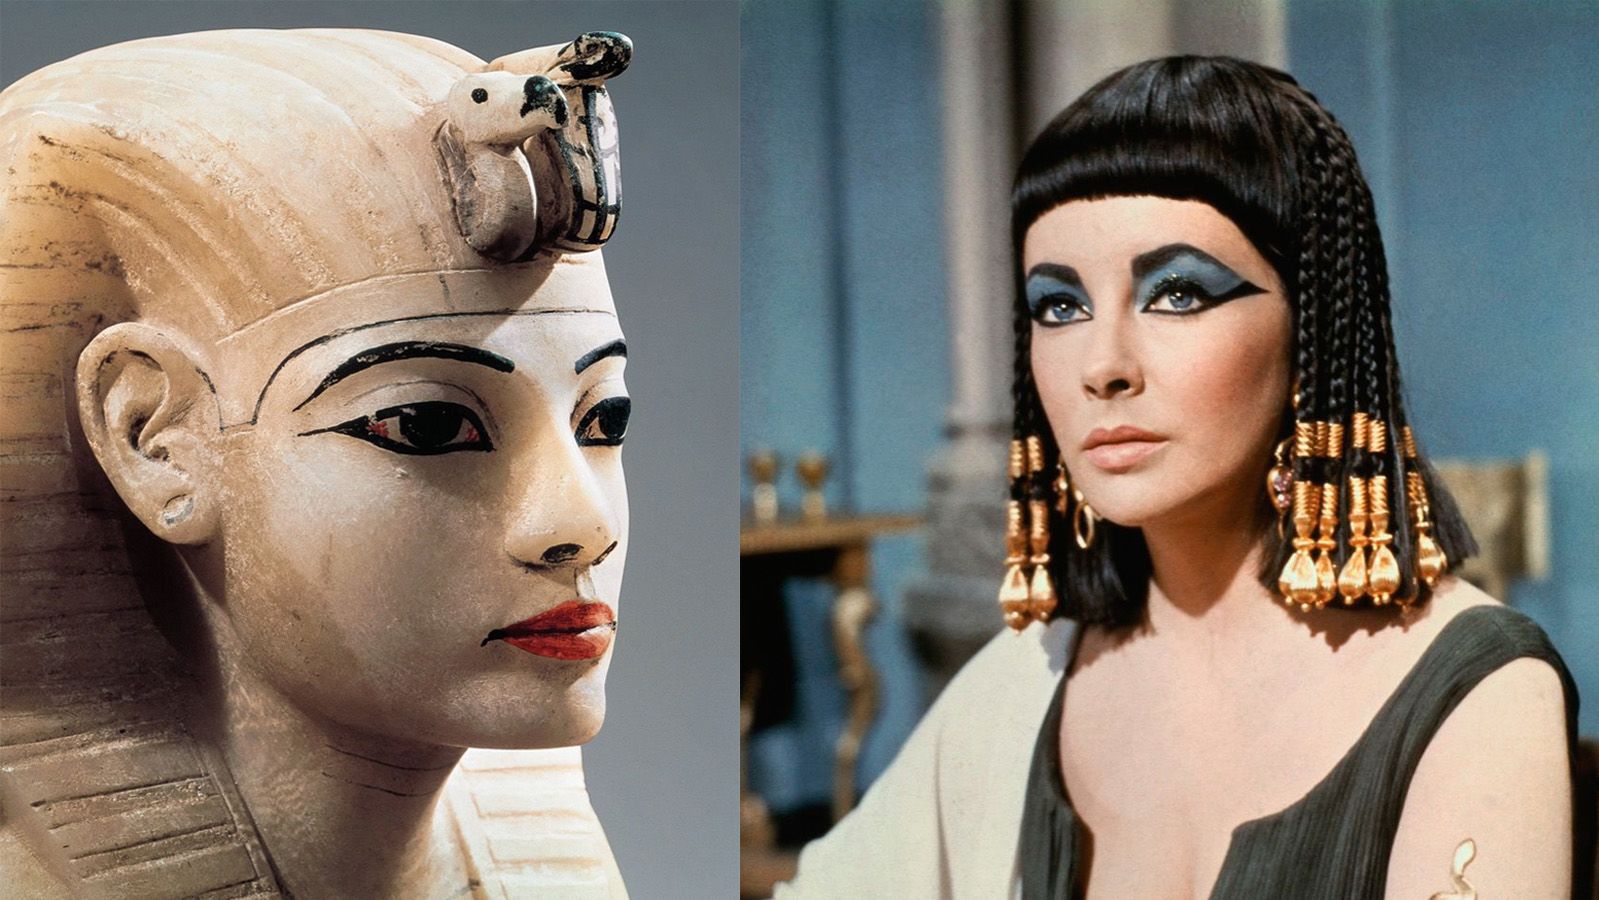 Långiver foredrag vinde How ancient Egyptian cosmetics influenced our beauty rituals | CNN